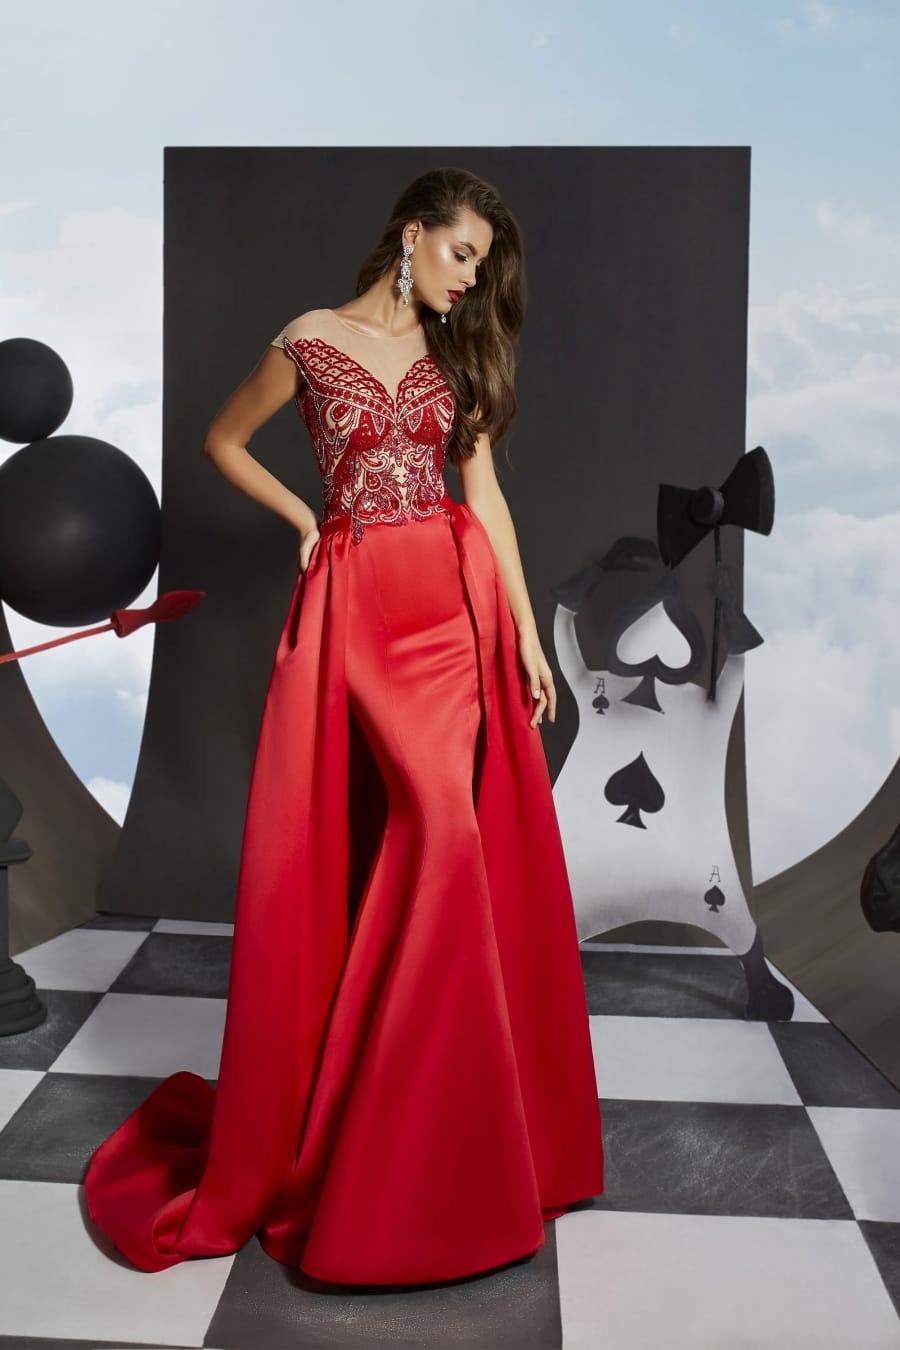 Ariamo 6204530000 Red Sparkling Ball Gown on model - Rofial Beauty